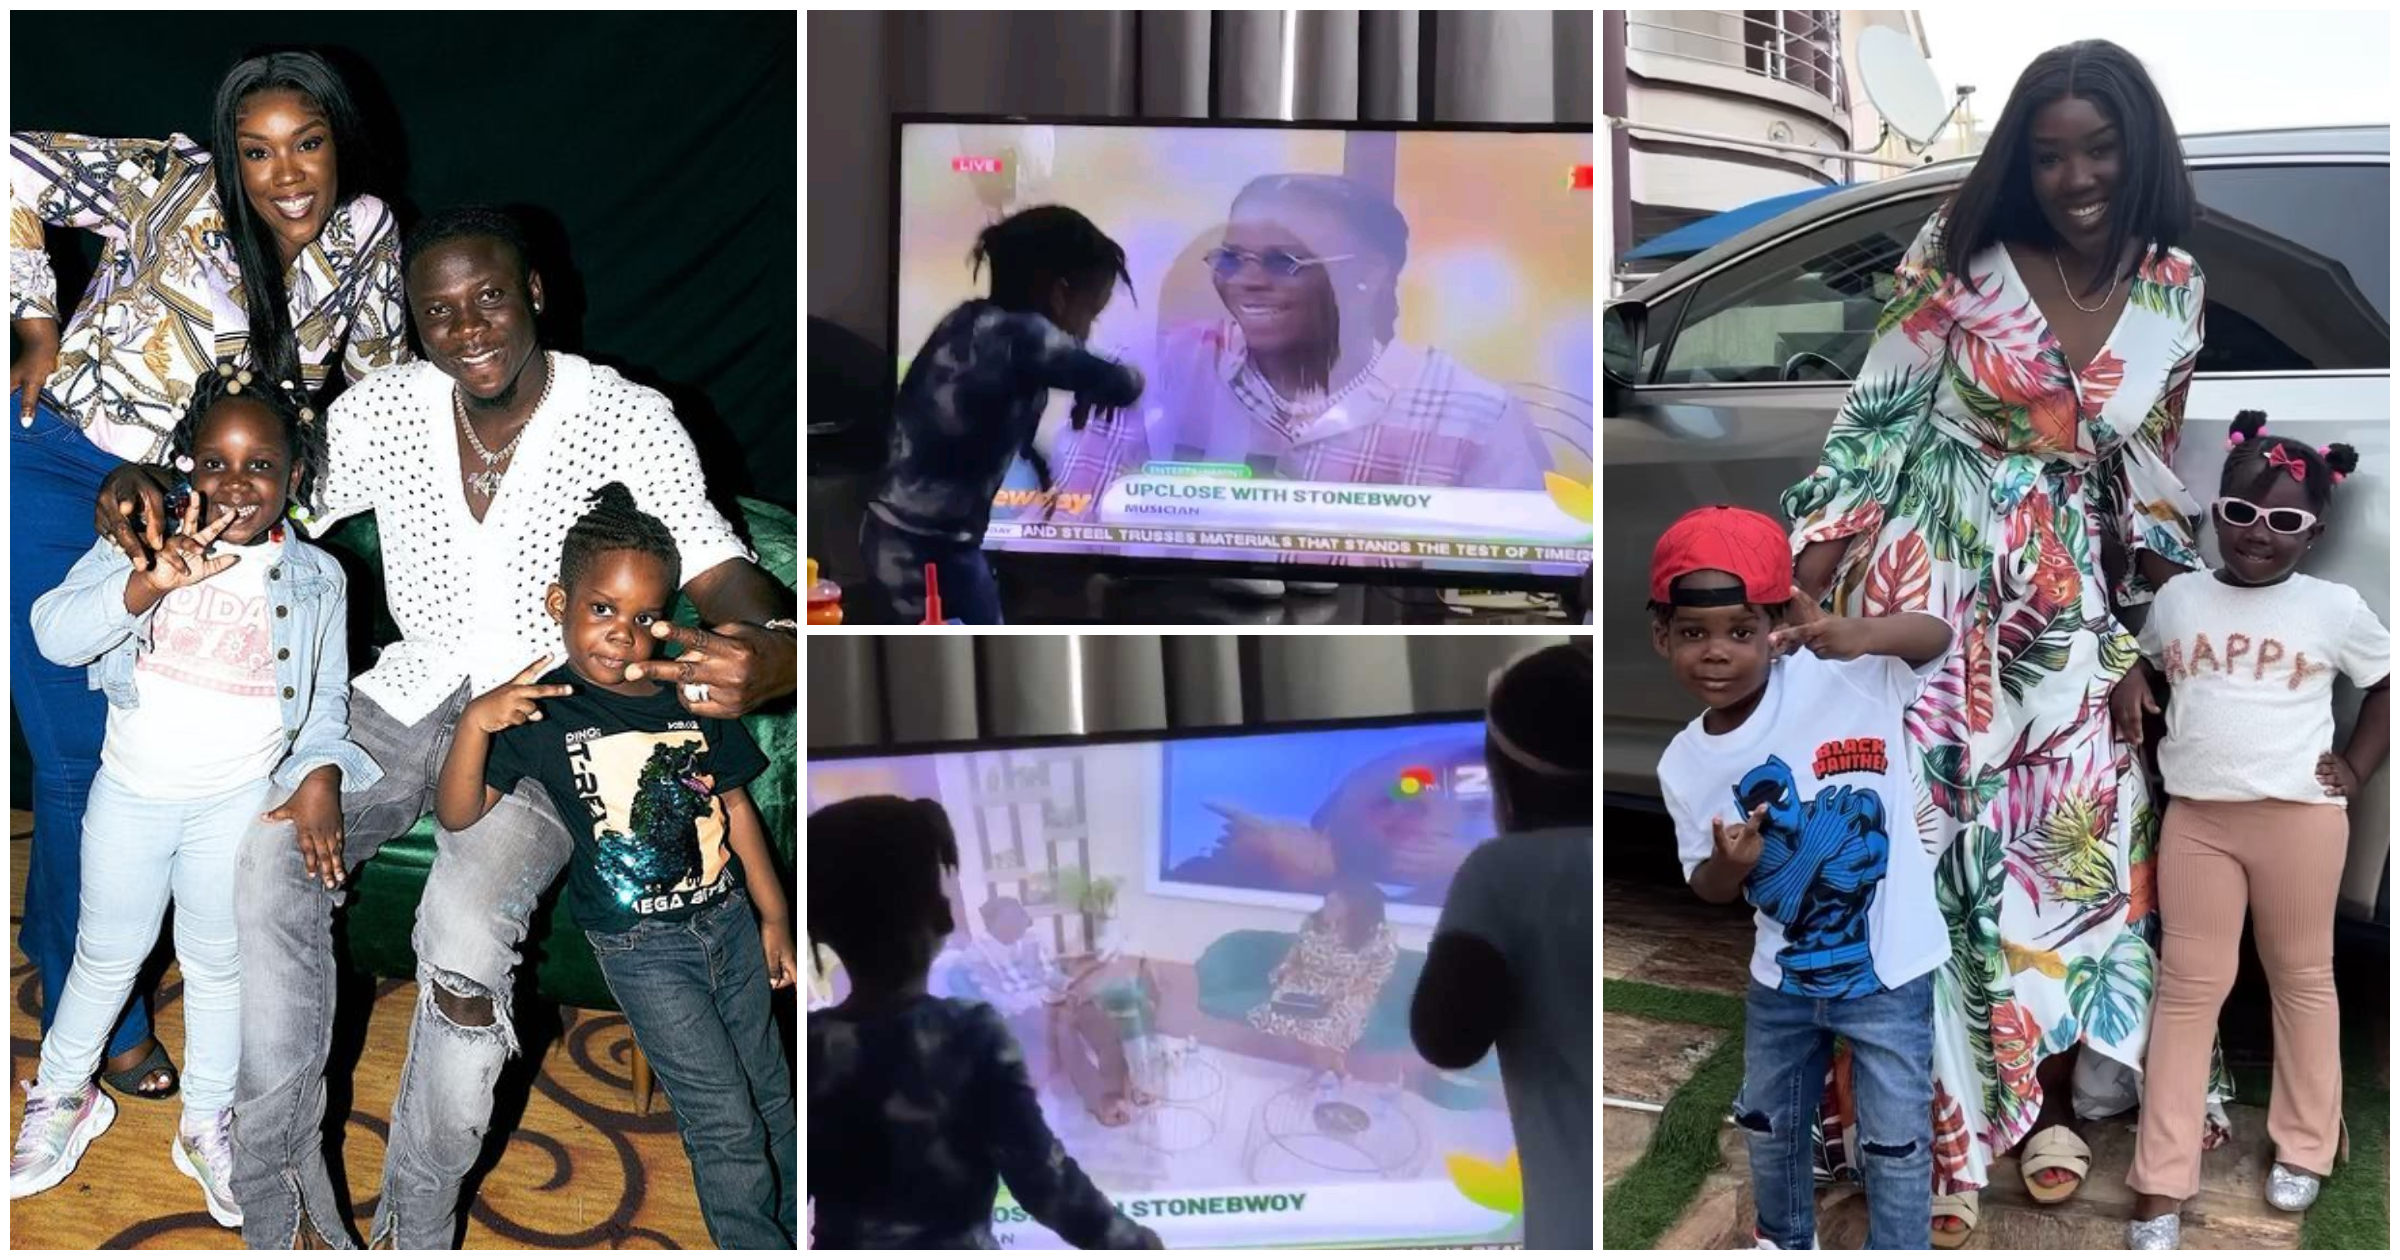 Stonebwoy with wife and children